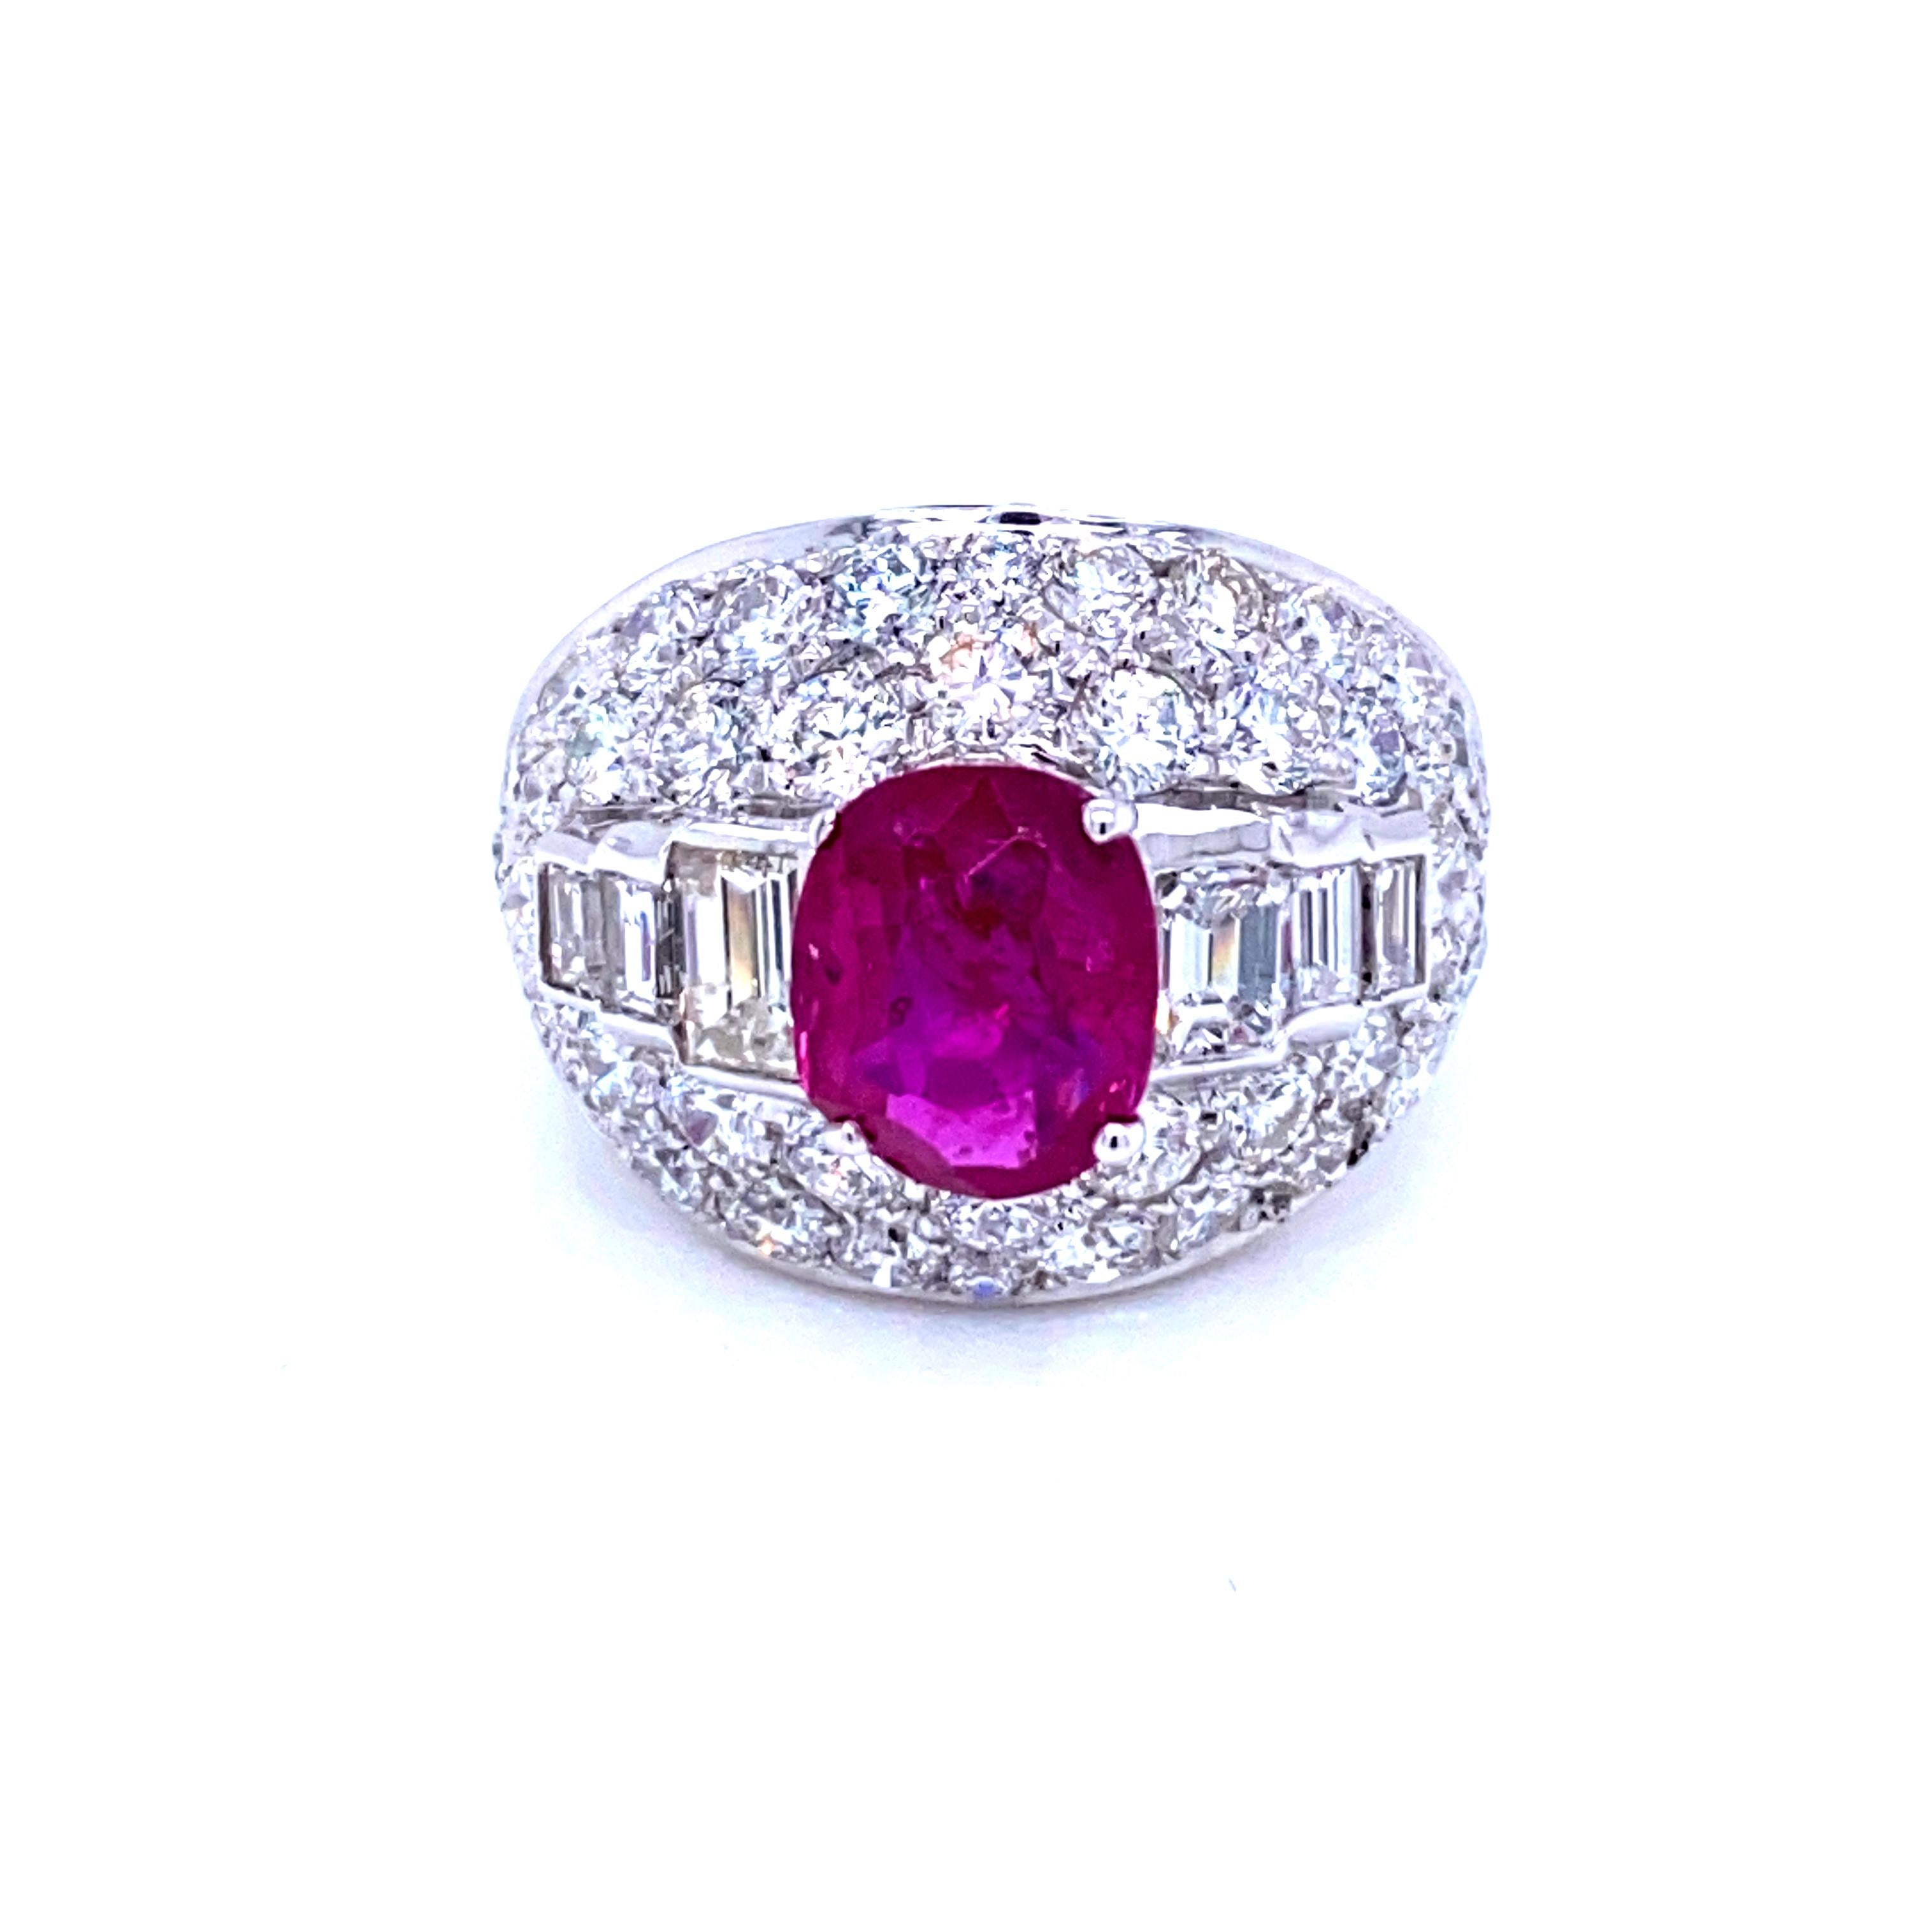 Sensational one of a kind Ruby and Diamonds cocktail ring, handcrafted in 18k white gold.

An important 18k white gold mount showcasing an exceptional oval-cut Natural untreated Ruby weighing 2.52 carats, surrounded by 3.80 carat of Diamonds, fine